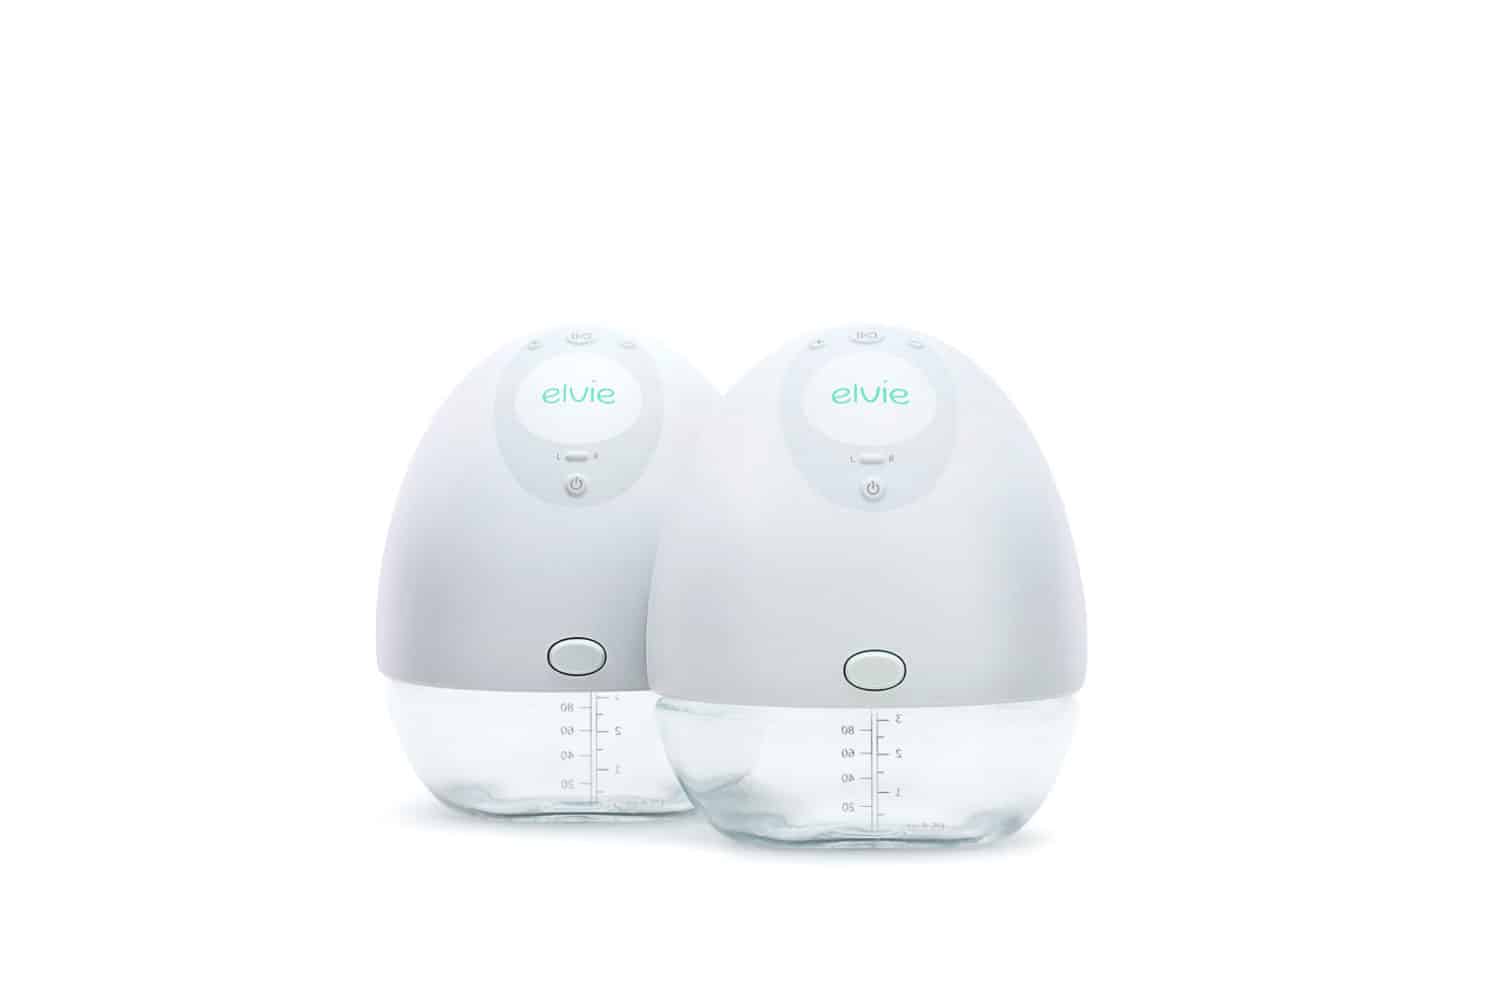 Elvie Breast Pump Review: Honest Thoughts From A Real Mum & Where To Buy